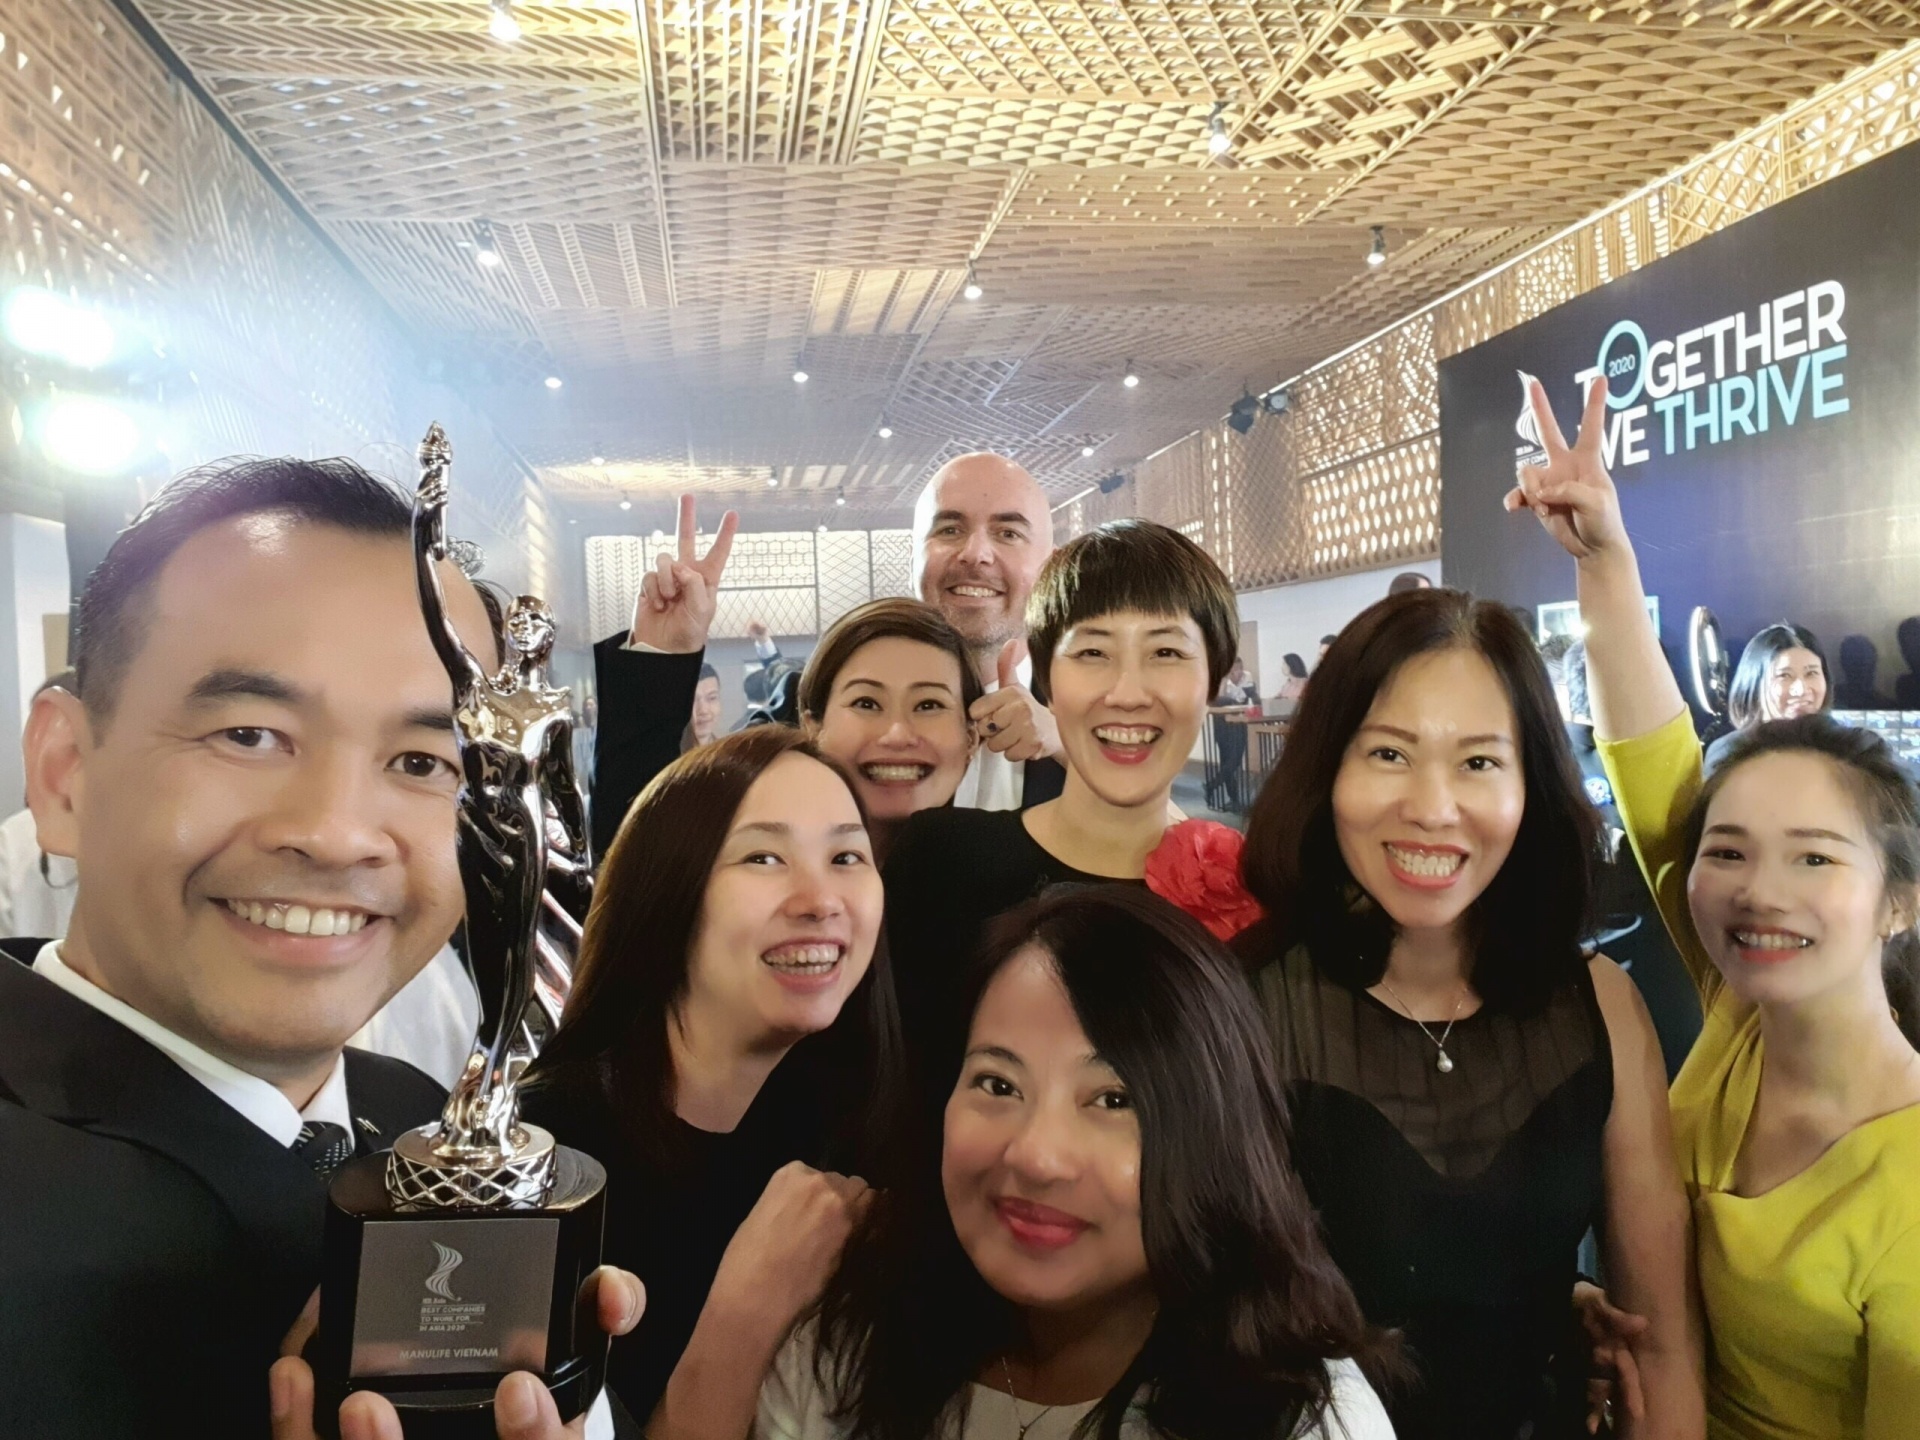 Manulife Vietnam awarded for encouraging employees to think, act, and work differently